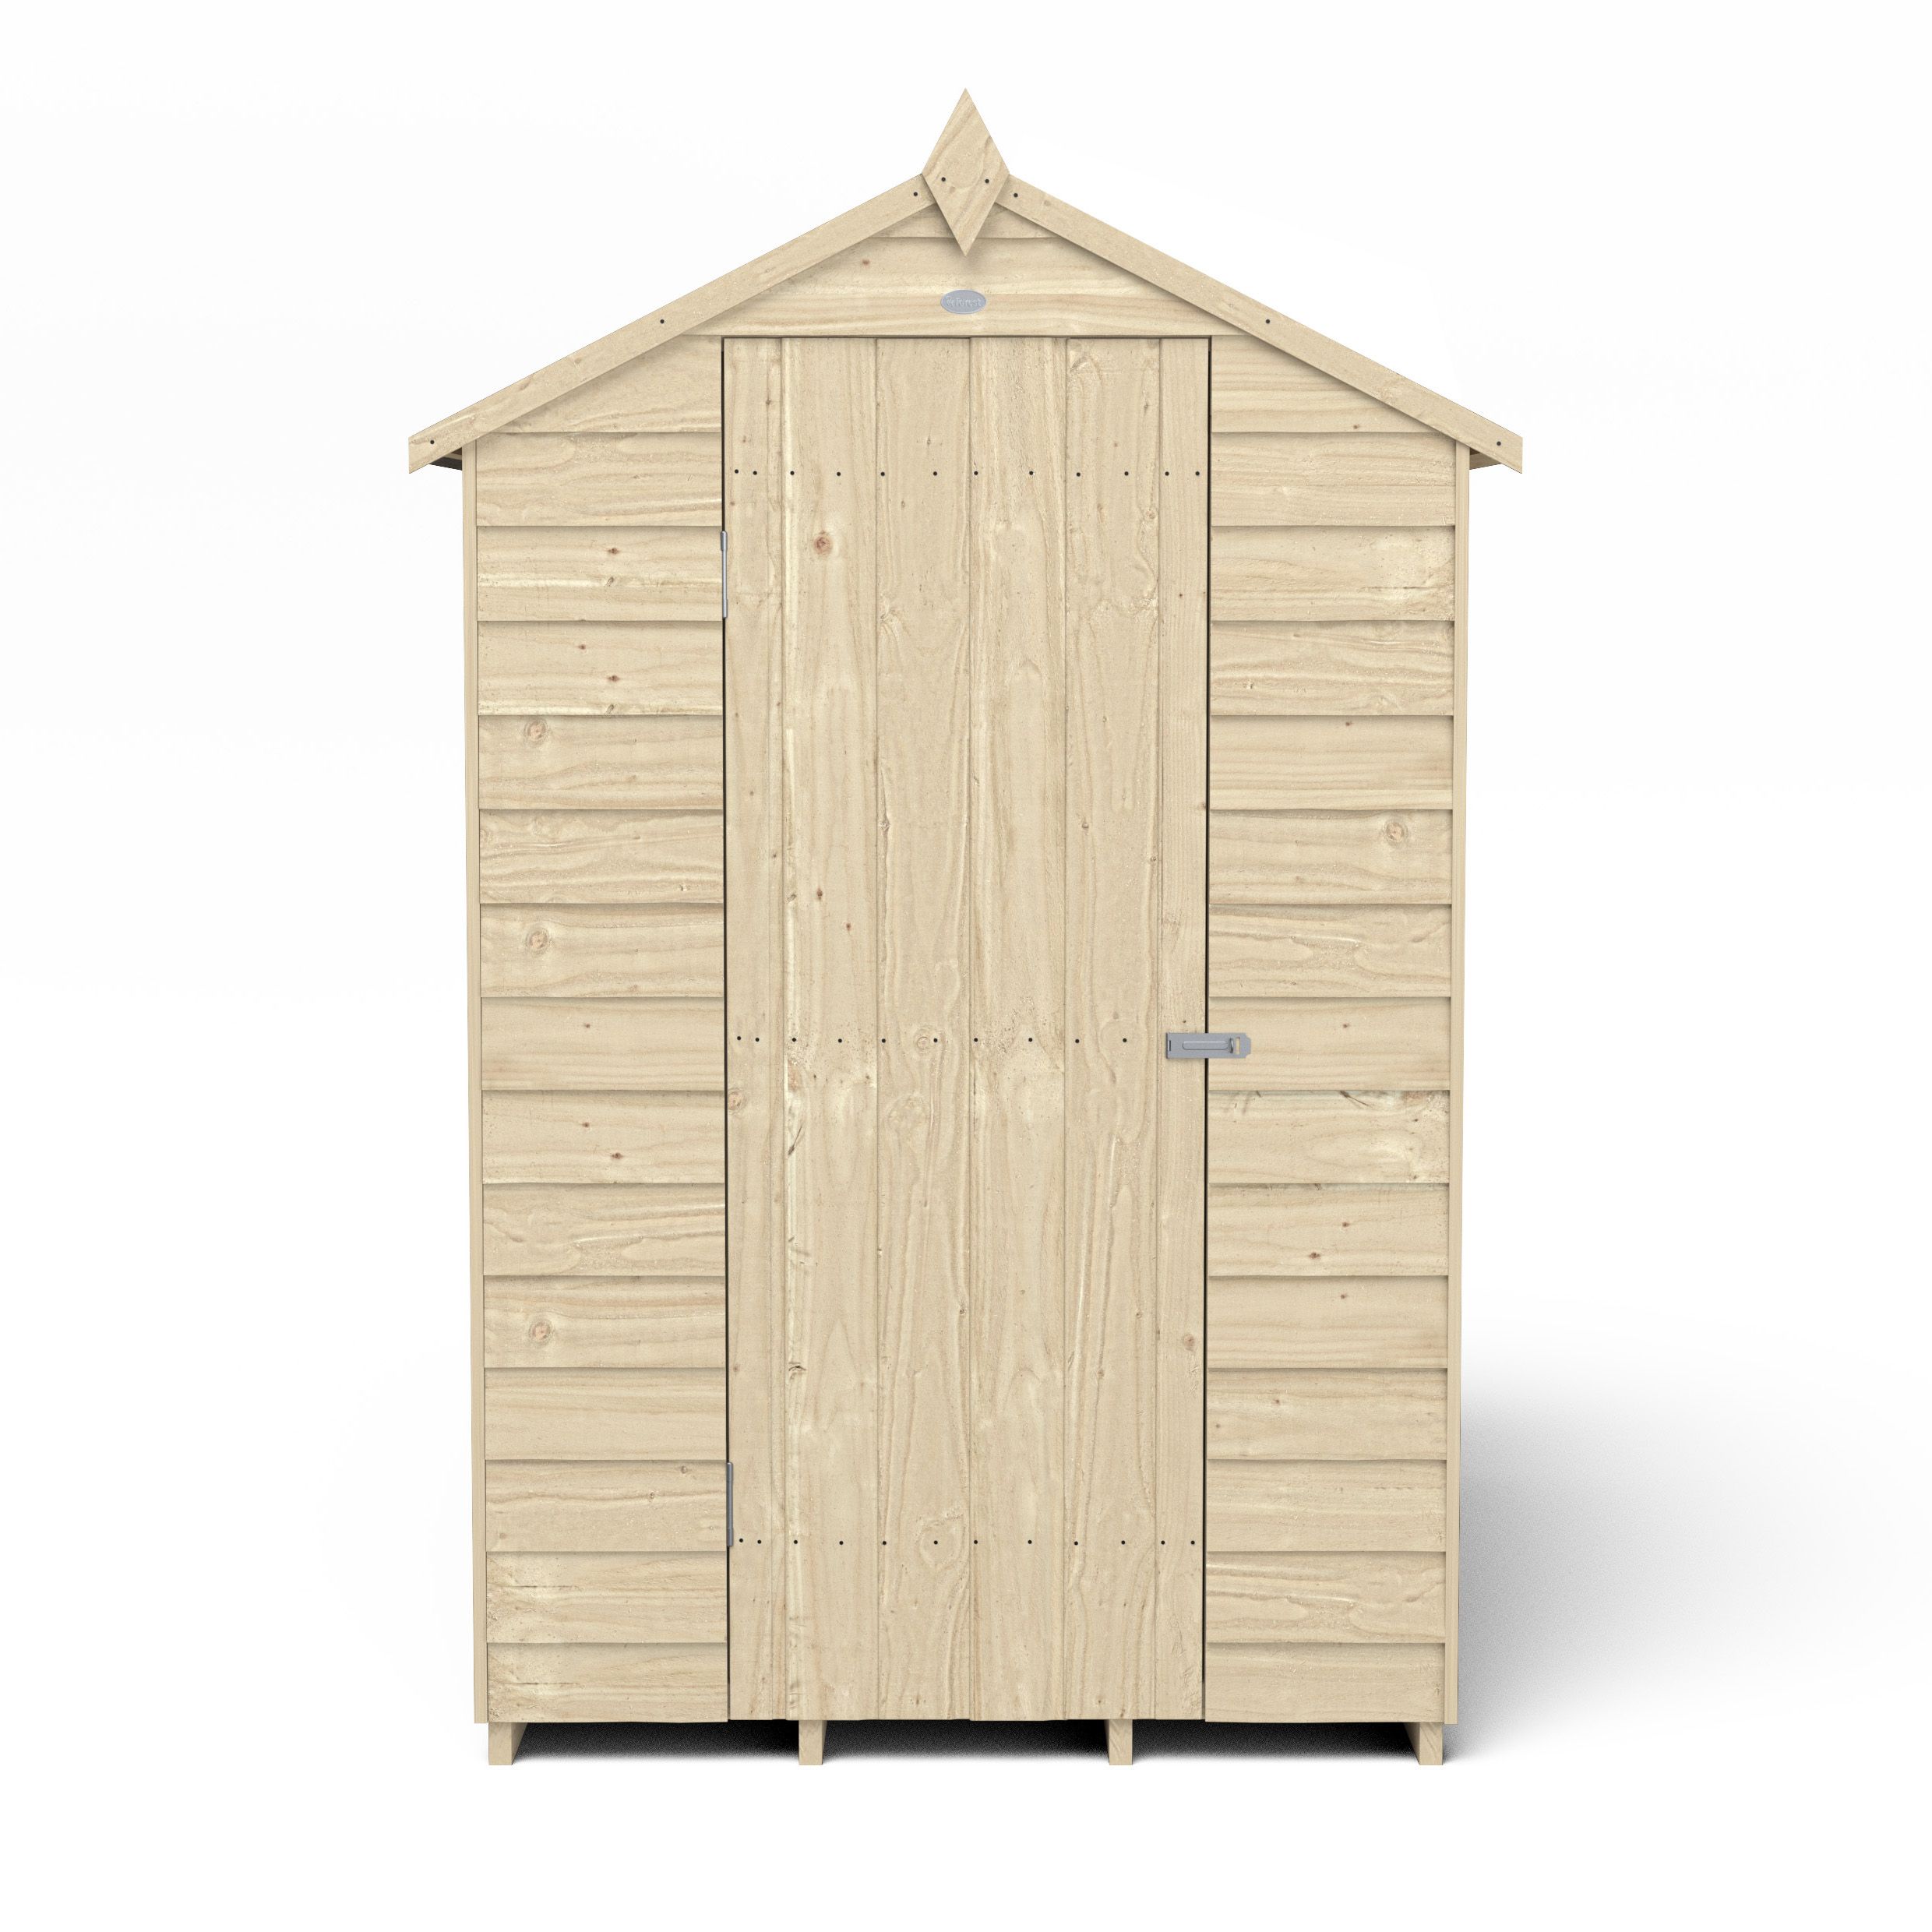 Forest Garden Overlap 6x4 ft Apex Wooden Pressure treated Shed with floor & 1 window (Base included)